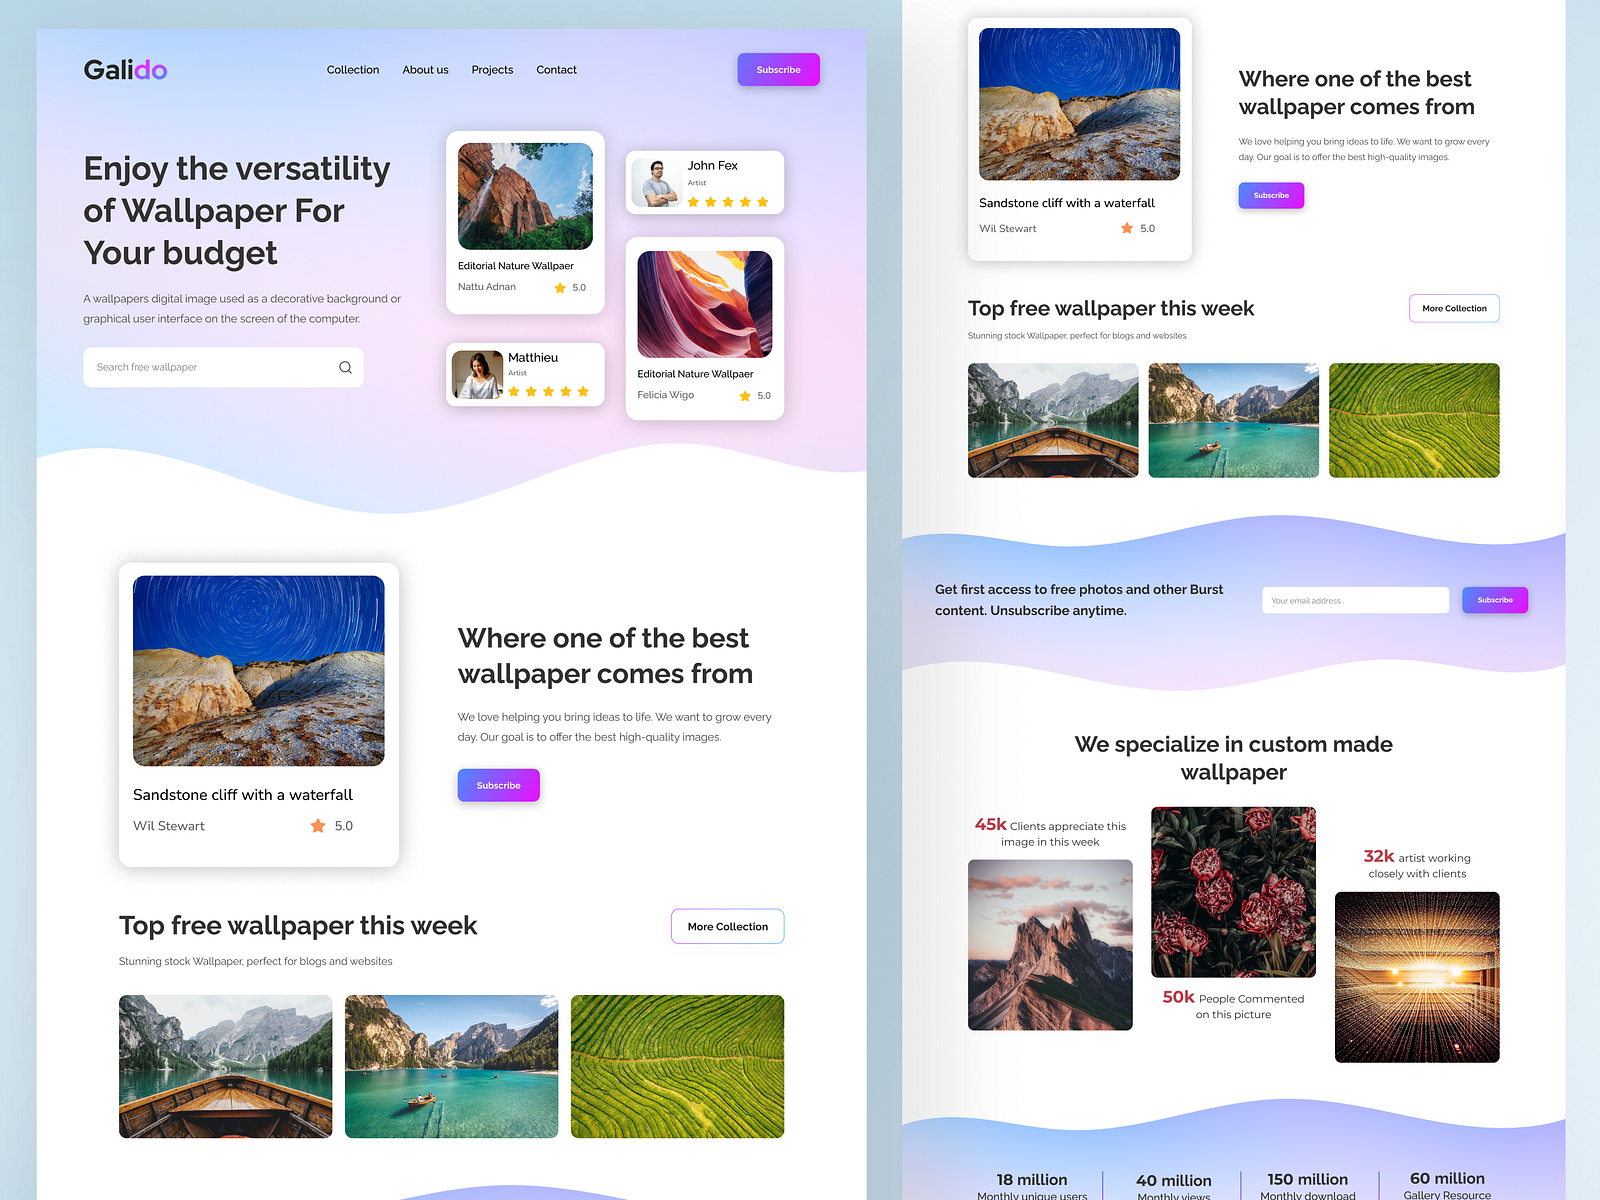 Exploration for Image Stock Landing Page by madhura gaydhane on Dribbble